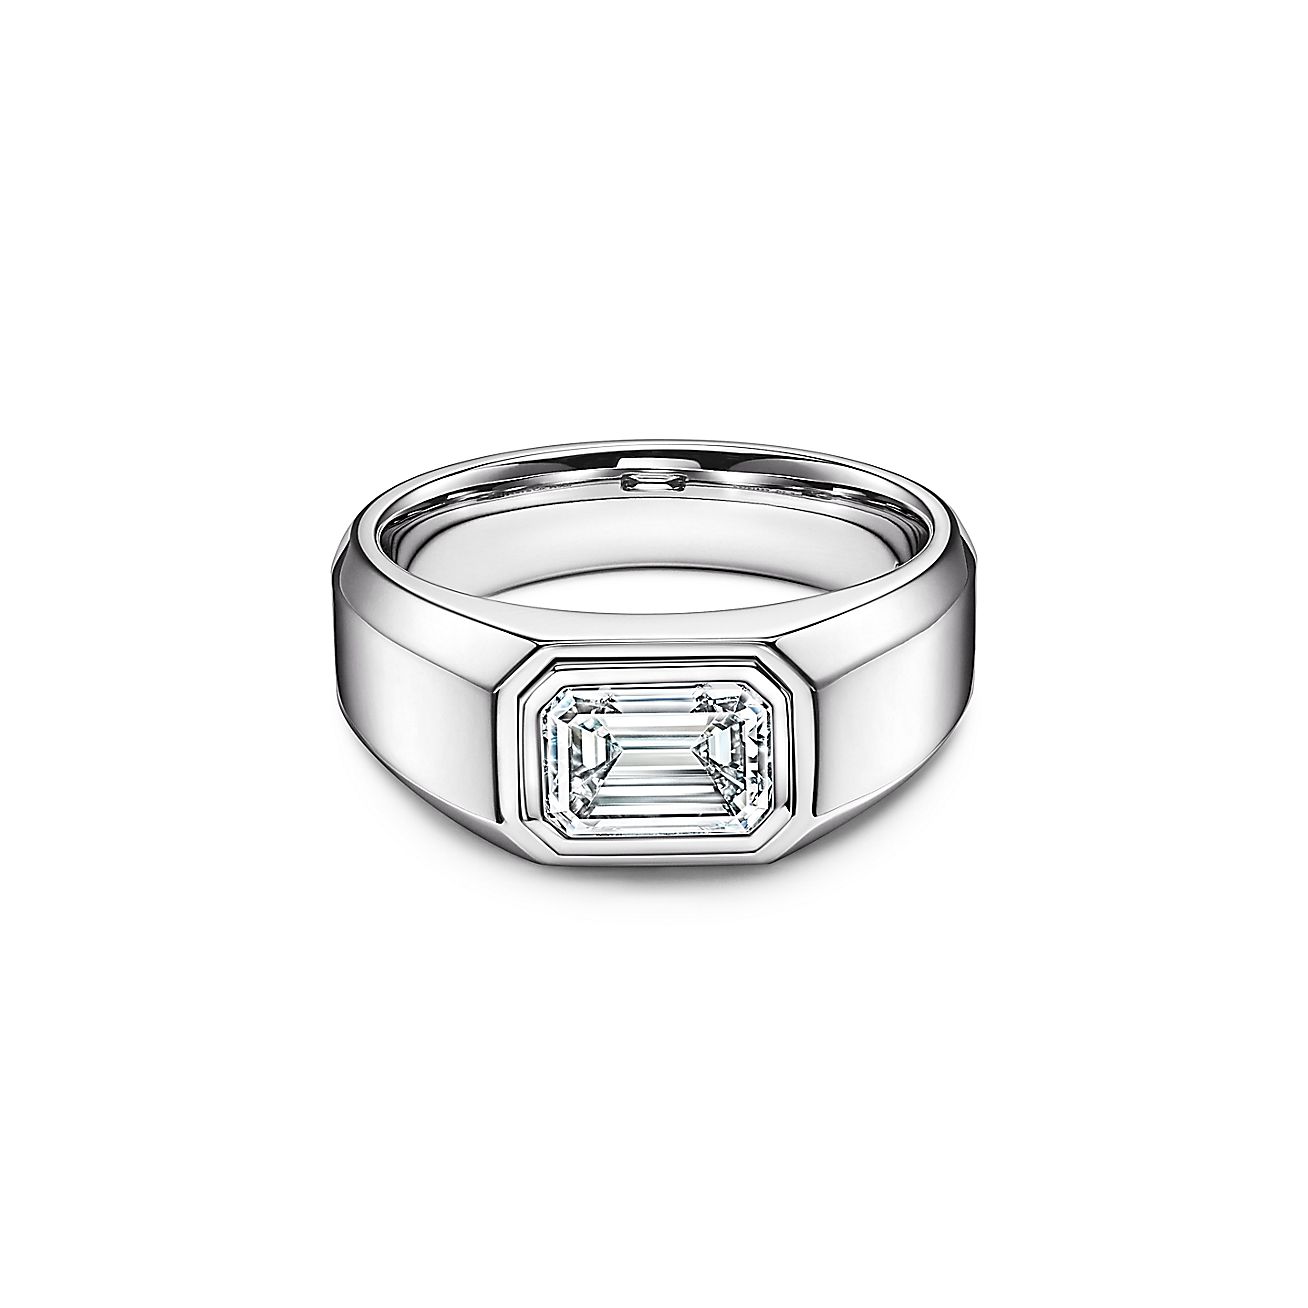 Lam handtekening belegd broodje The Charles Tiffany Setting Men's Engagement Ring in Platinum with a  Diamond | Tiffany & Co.